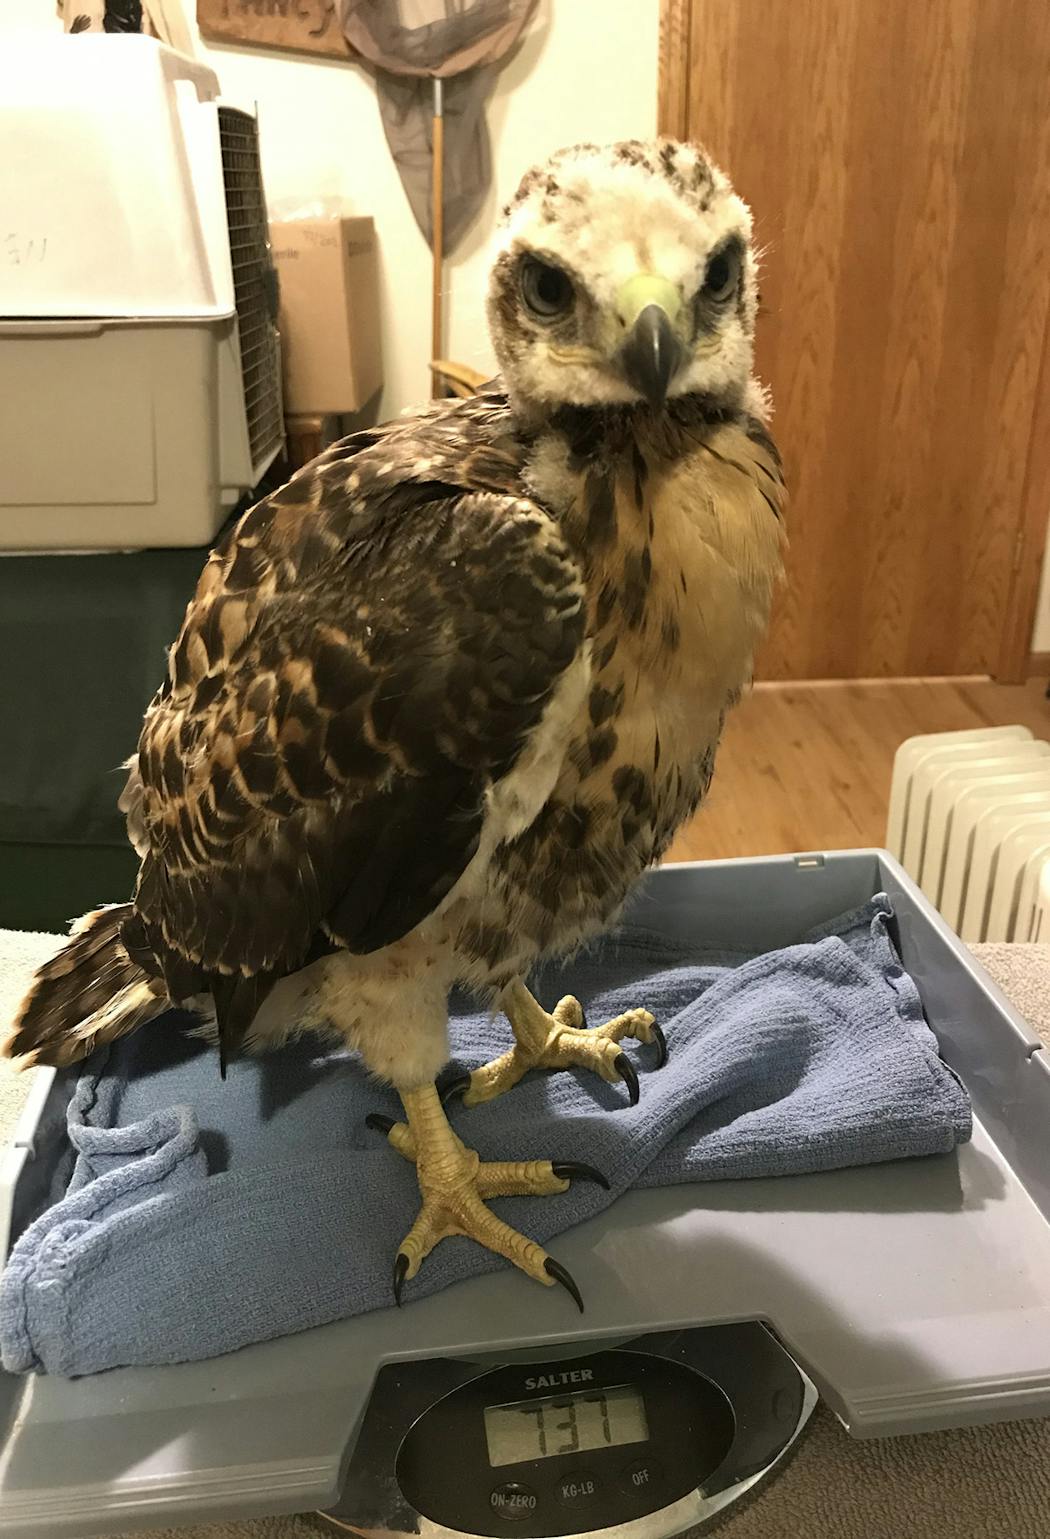 The young red-tailed hawk was cared for by The Raptor Center after being brought to staff Gail Buhl’s home June 10. It was hungry and a little dehydrated more than anything.